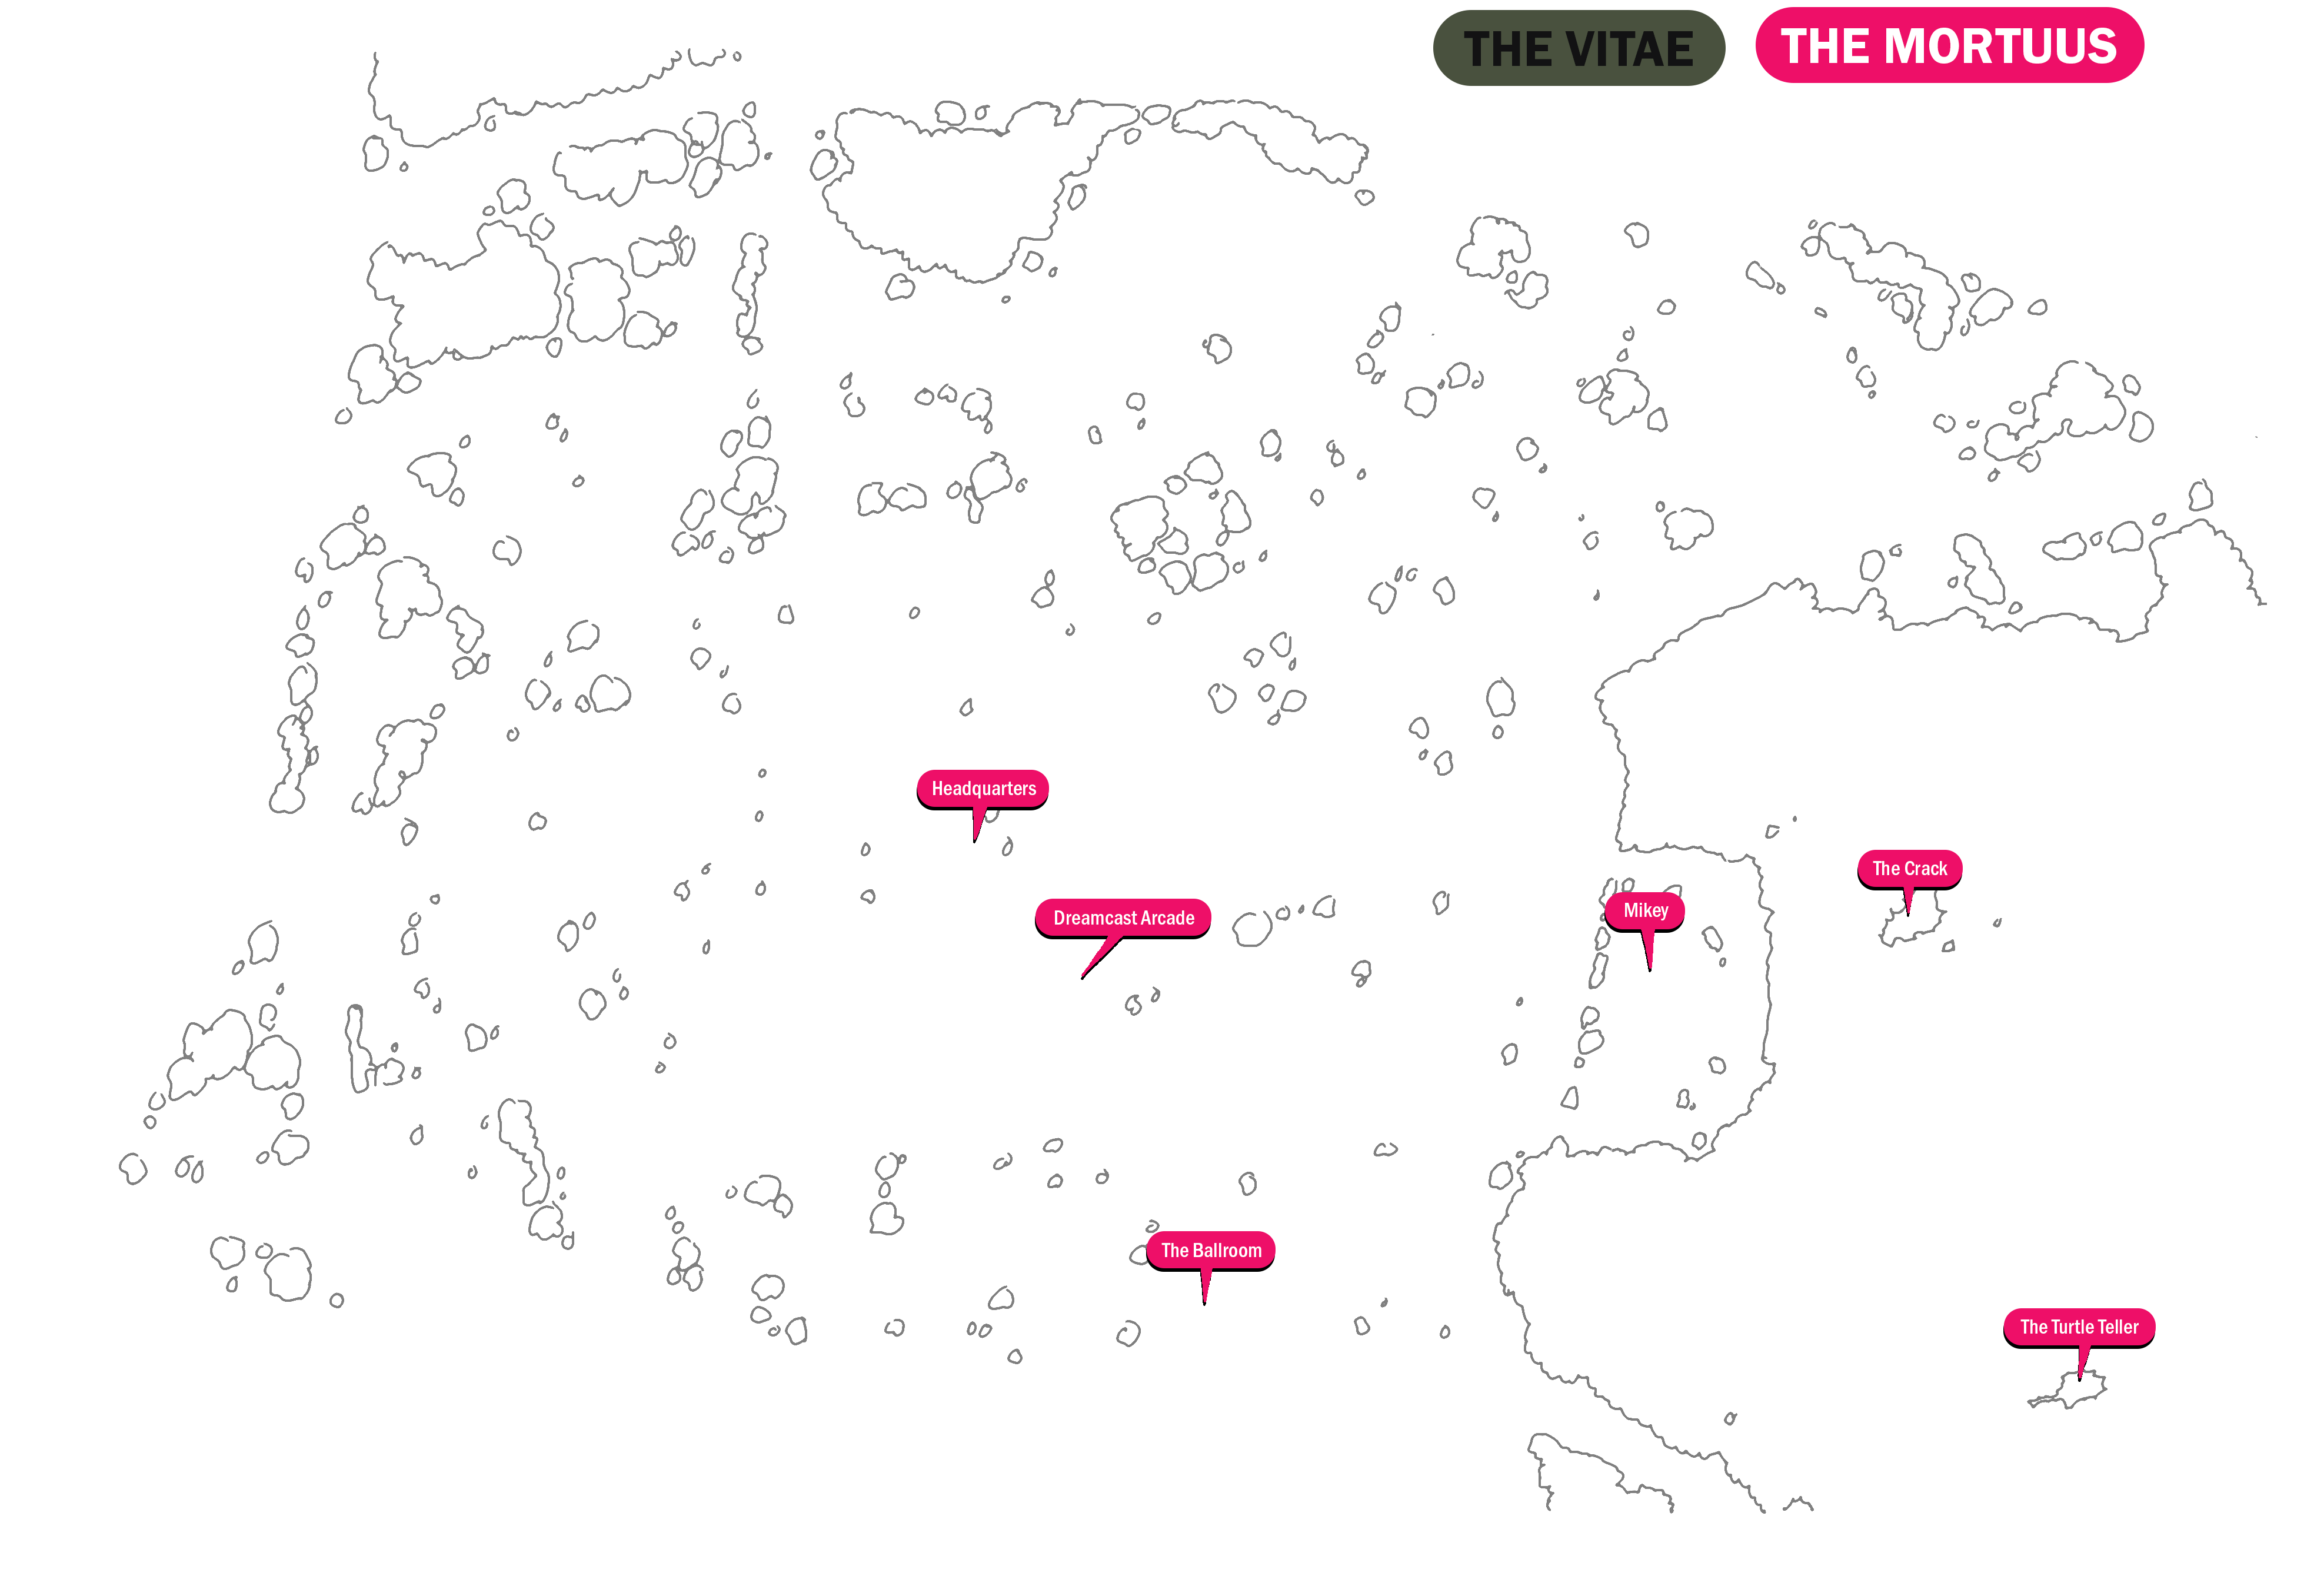 map of inkwell with locations in the mortuus marked, such as dreamcast arcade, the ballroom, mikey's grave, the crack, and the turtle teller, the last two being far out in the woods